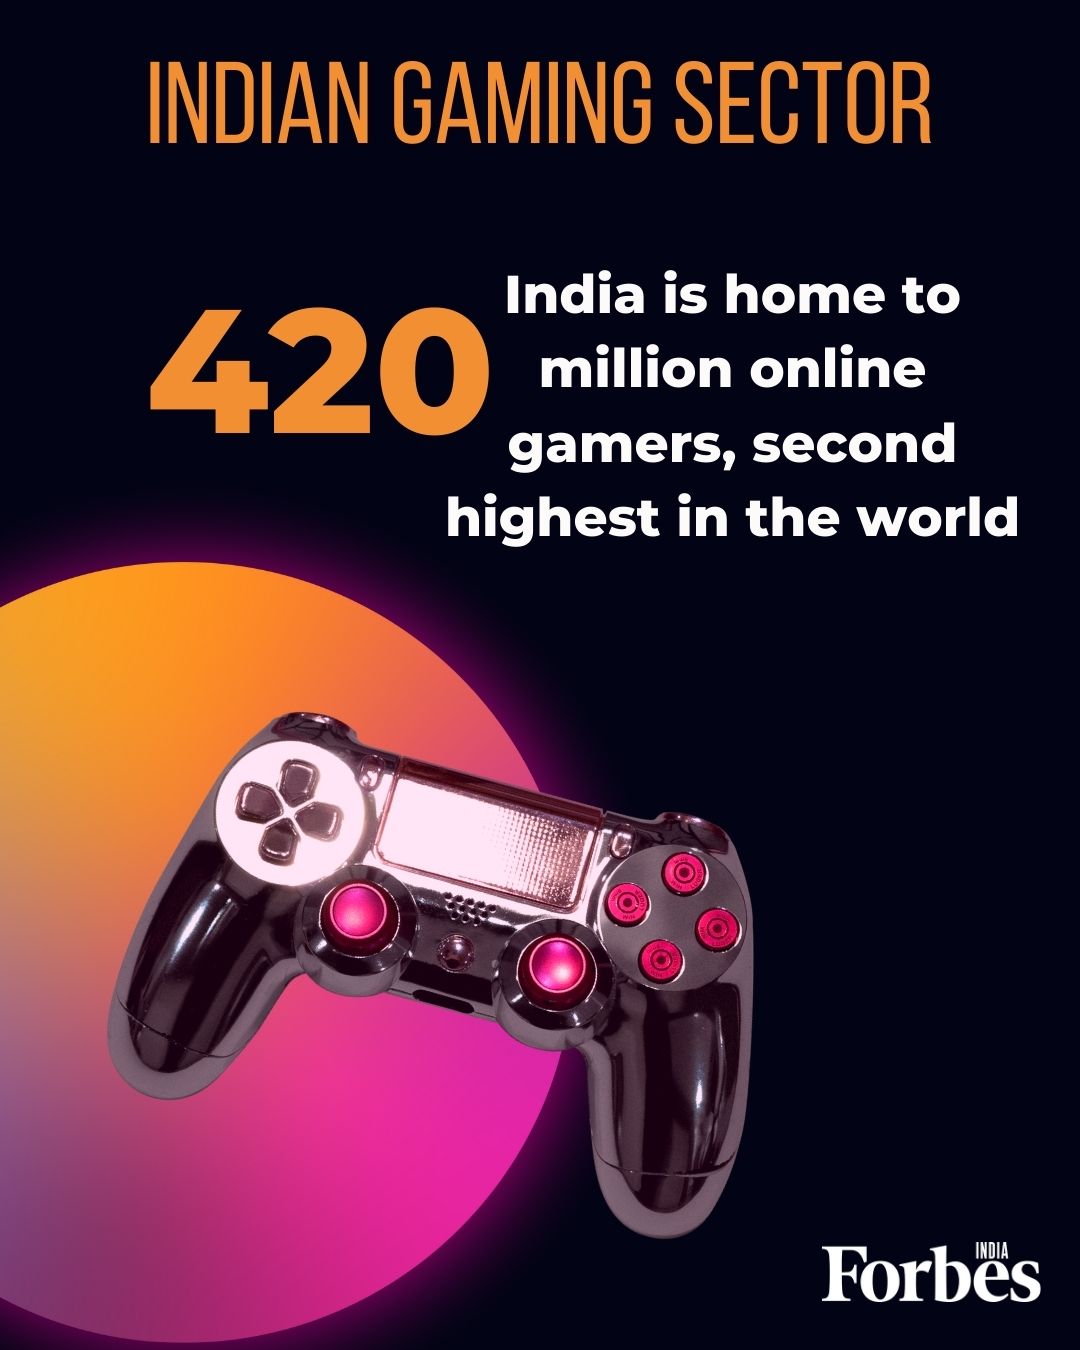 India is home to 420 million online gamers, second highest after China